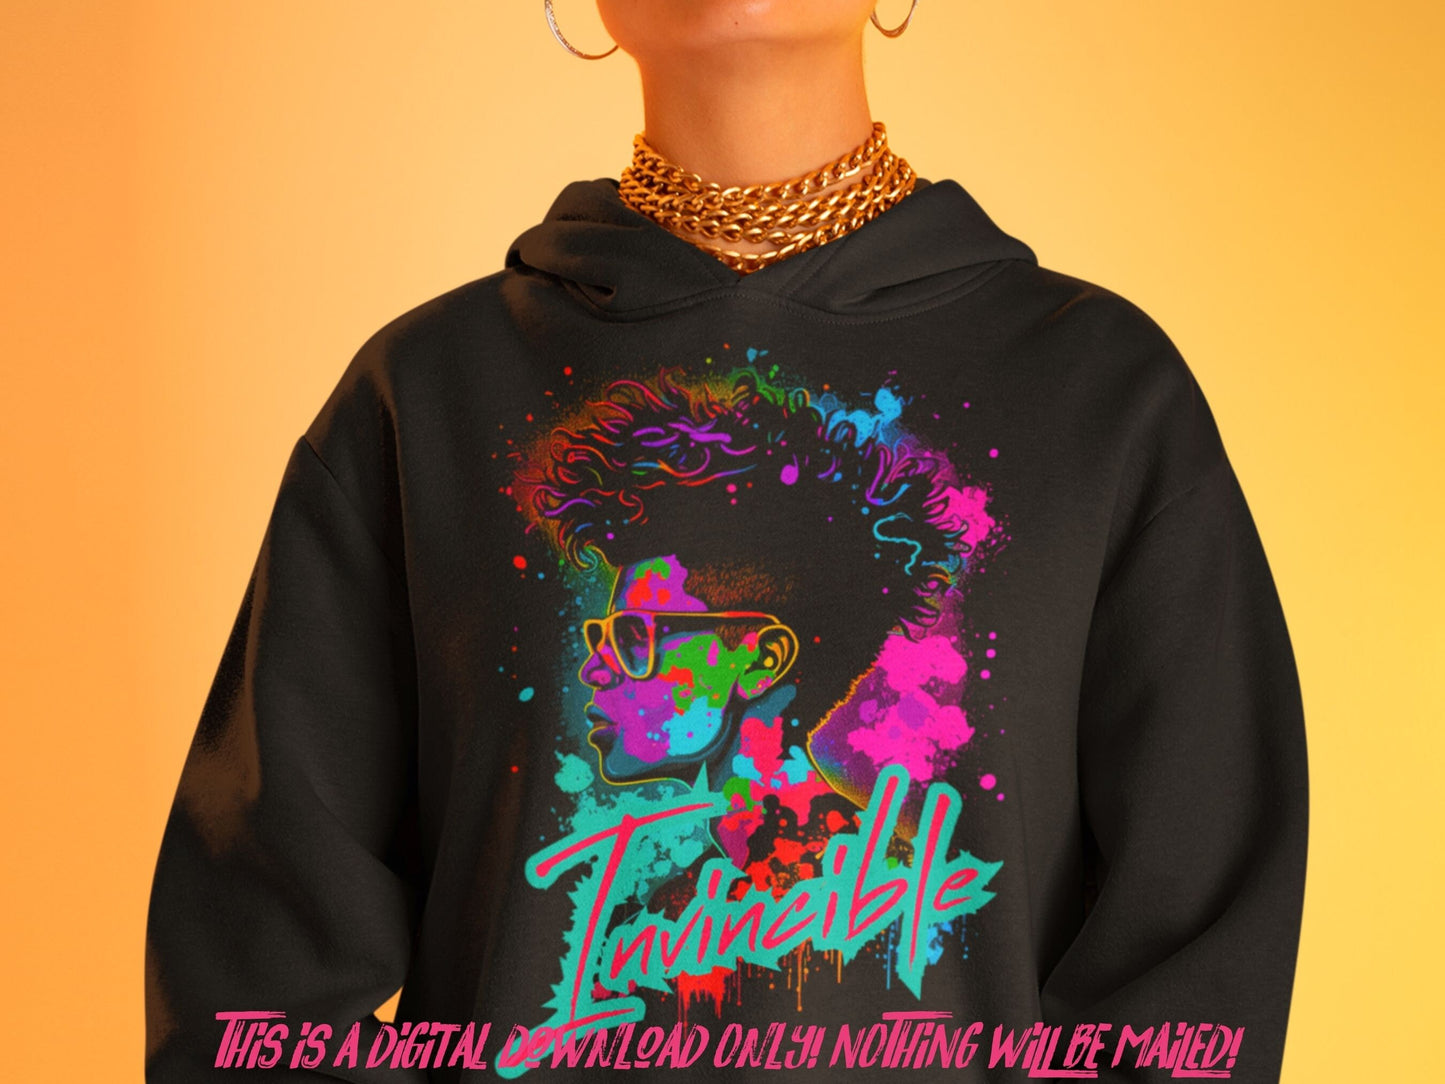 Invincible Woman Colorful png for shirts and sublimation designs, sublimation png for shirt, neon sublimation, feminist shirt design